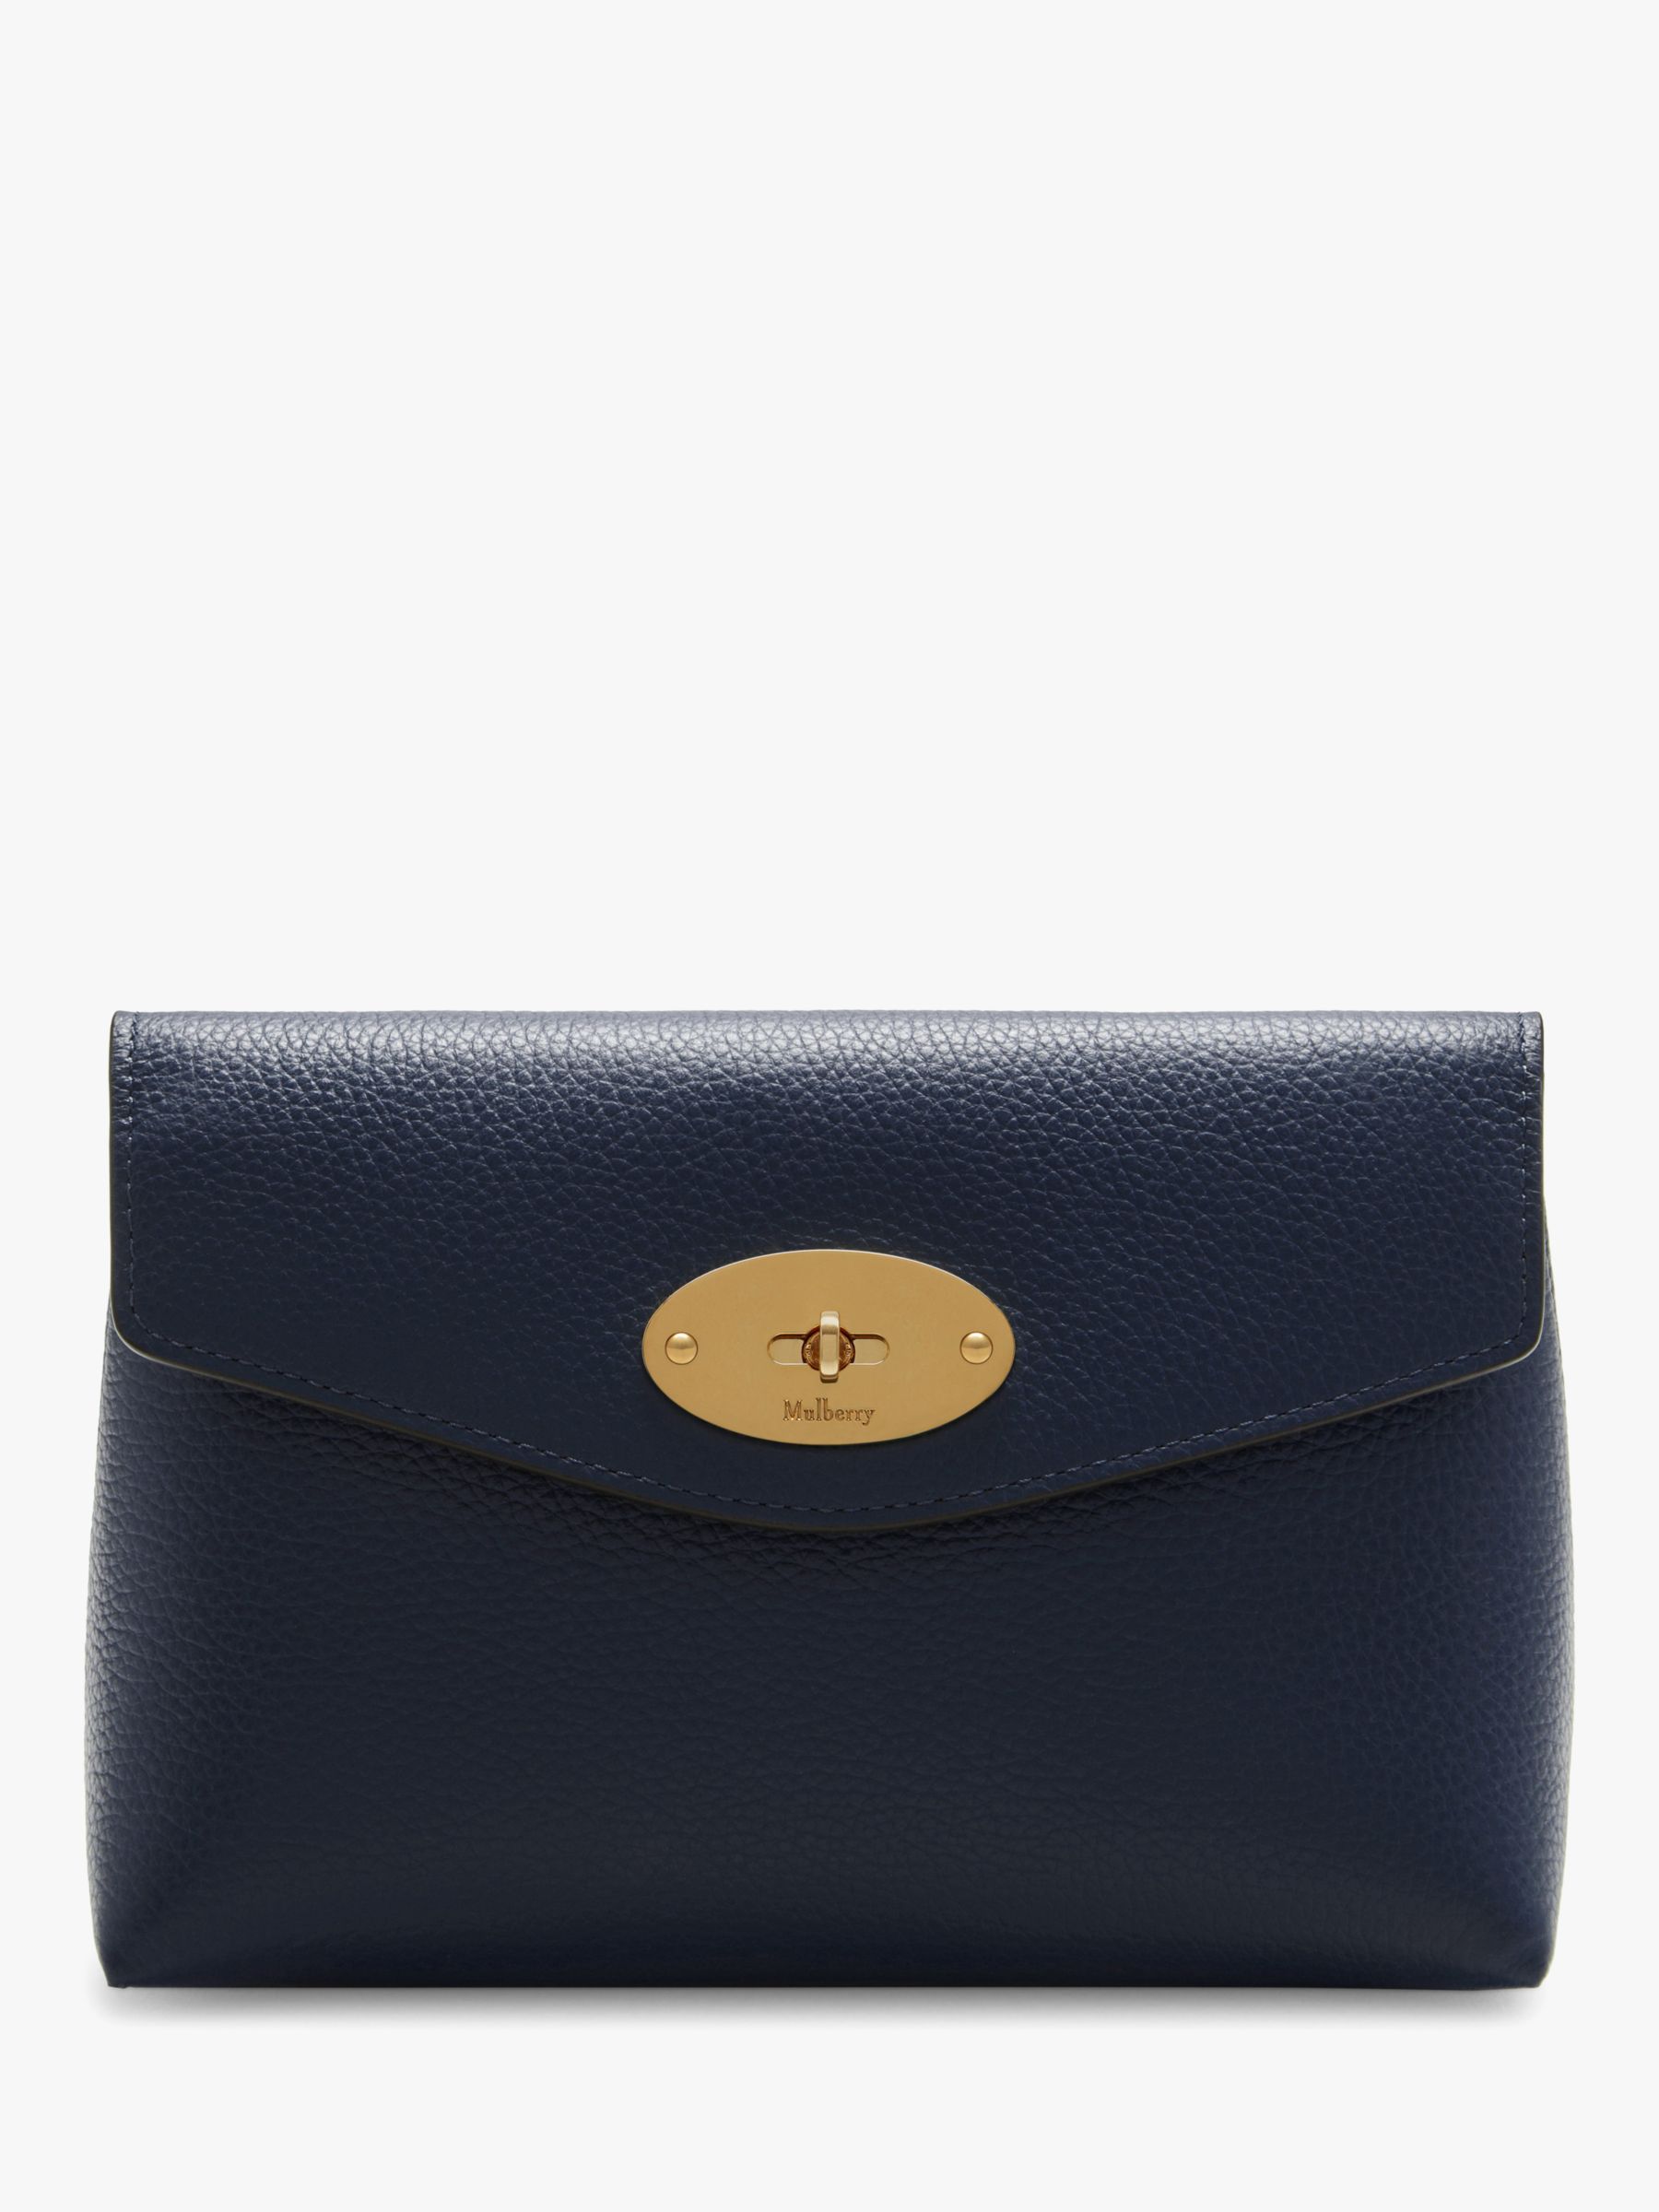 Mulberry Darley Classic Grain Leather Small Cosmetic Pouch, Bright Navy ...